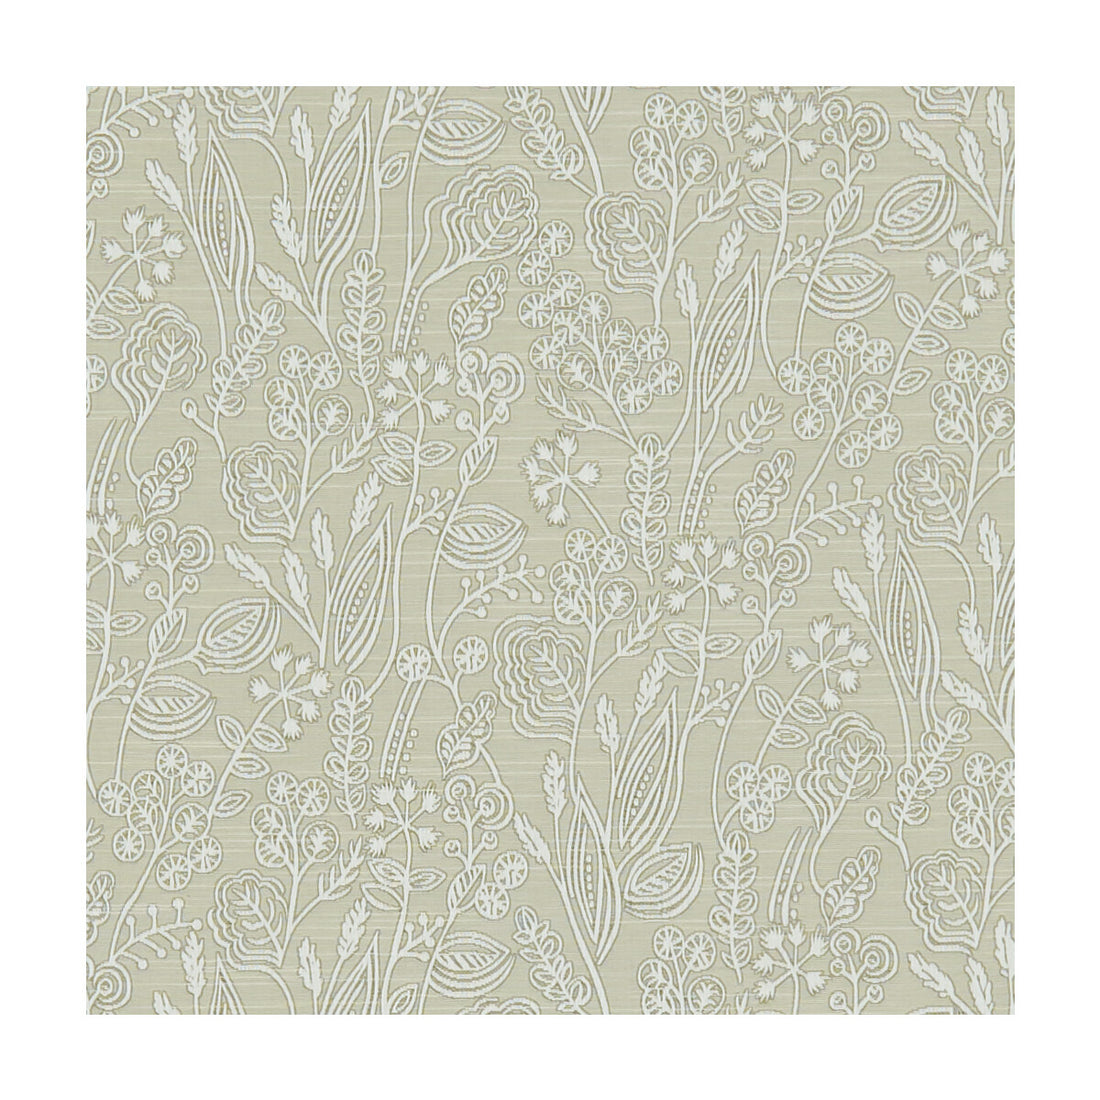 Marbury fabric in natural color - pattern F1230/06.CAC.0 - by Clarke And Clarke in the Marbury By Studio G For C&amp;C collection